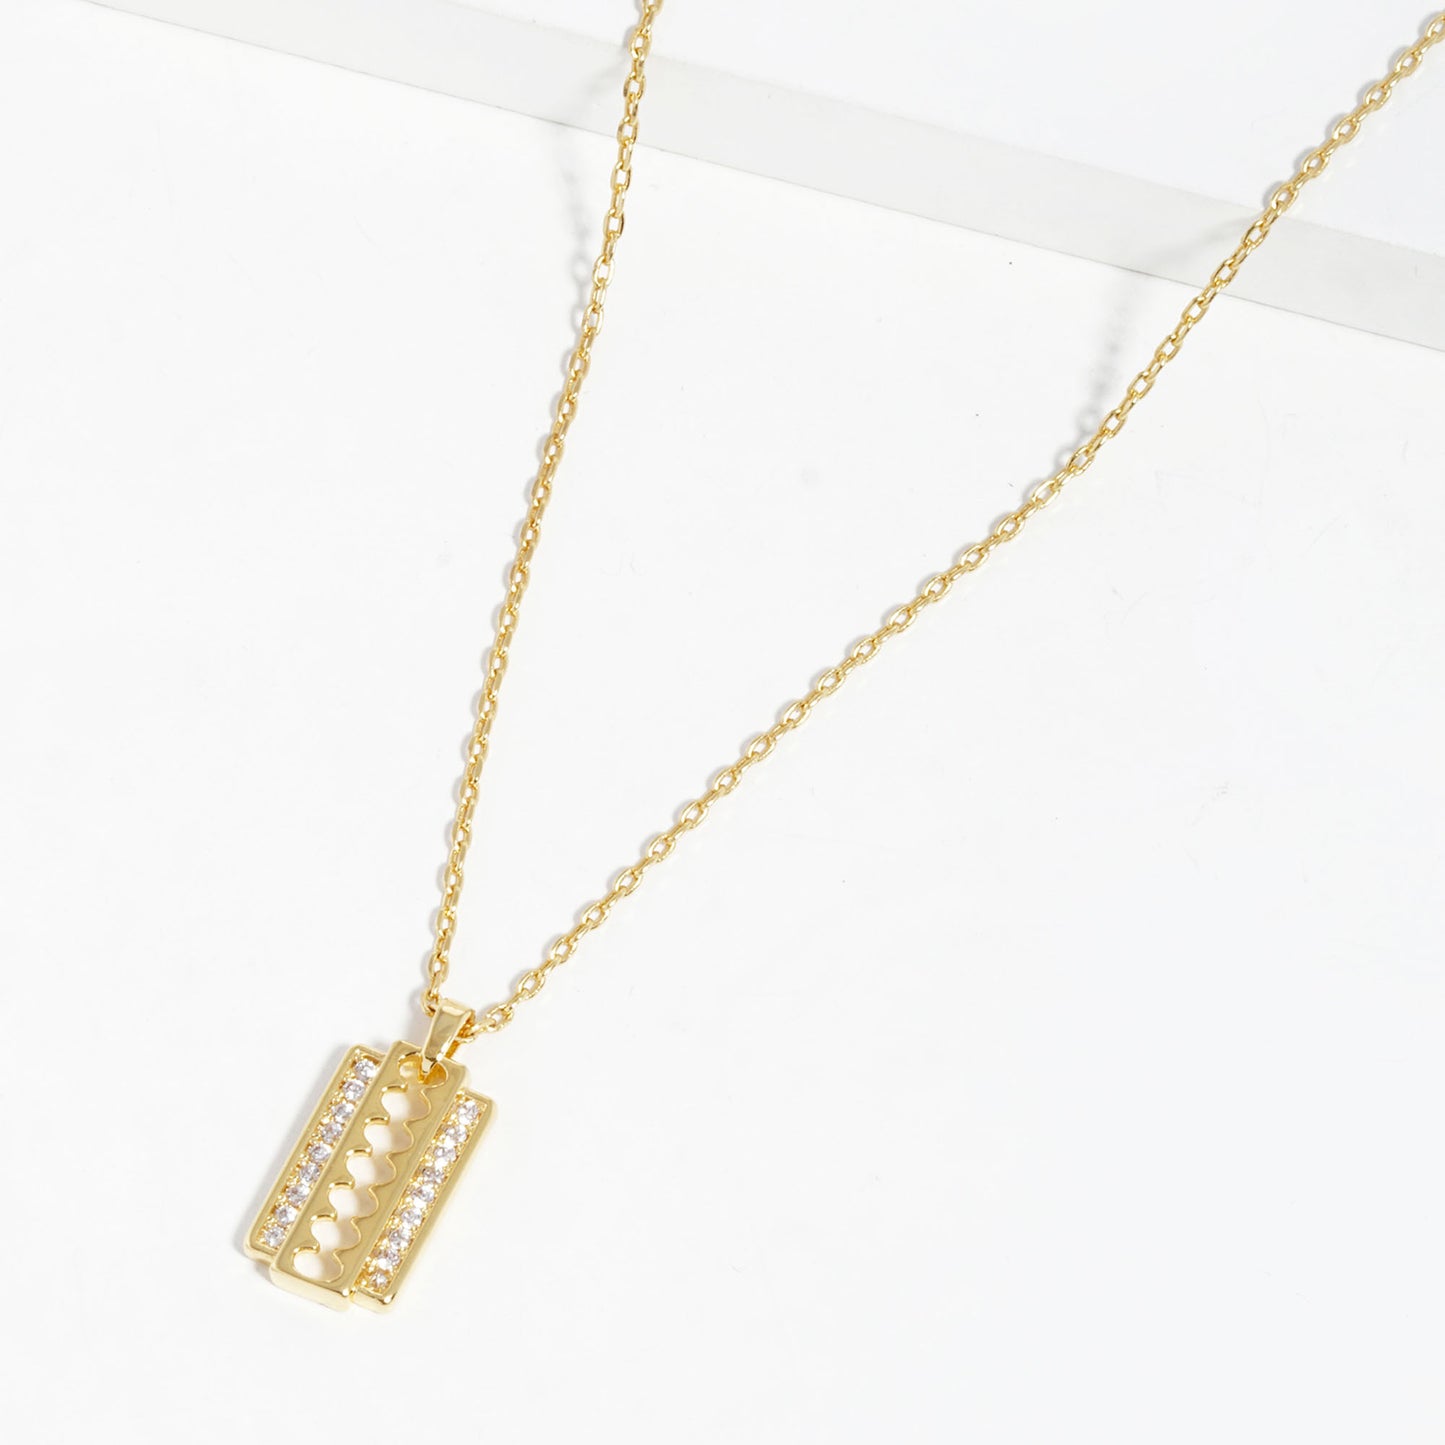 Gold Dipped Pendant Necklace